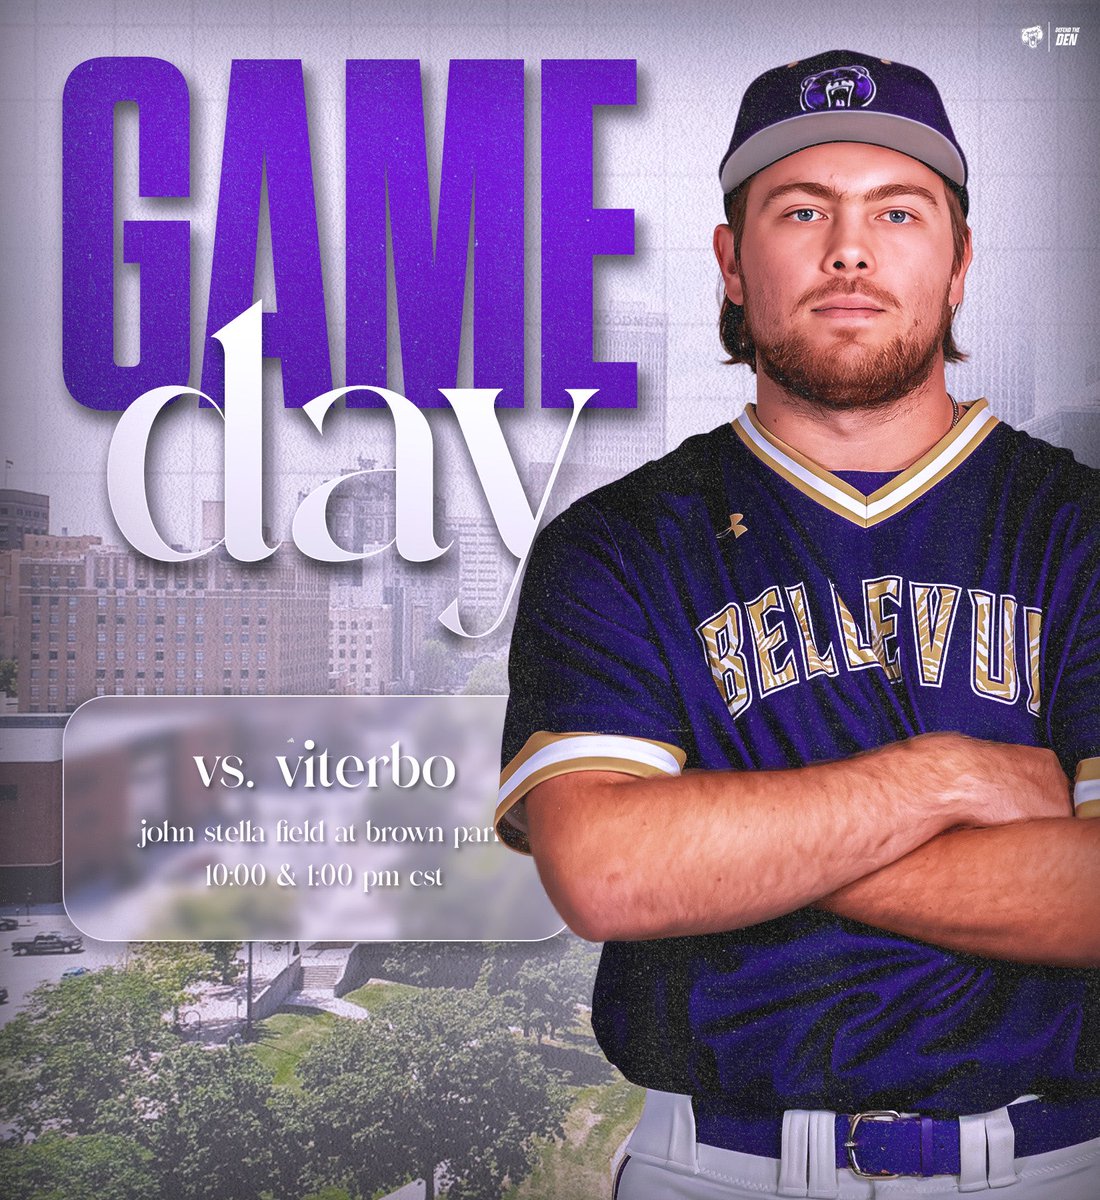 Final home series starts today! 🆚 Viterbo ⏰ 10:00 & 1:00 pm CST 📍John Stella Field at Brown Park #DefendTheDen